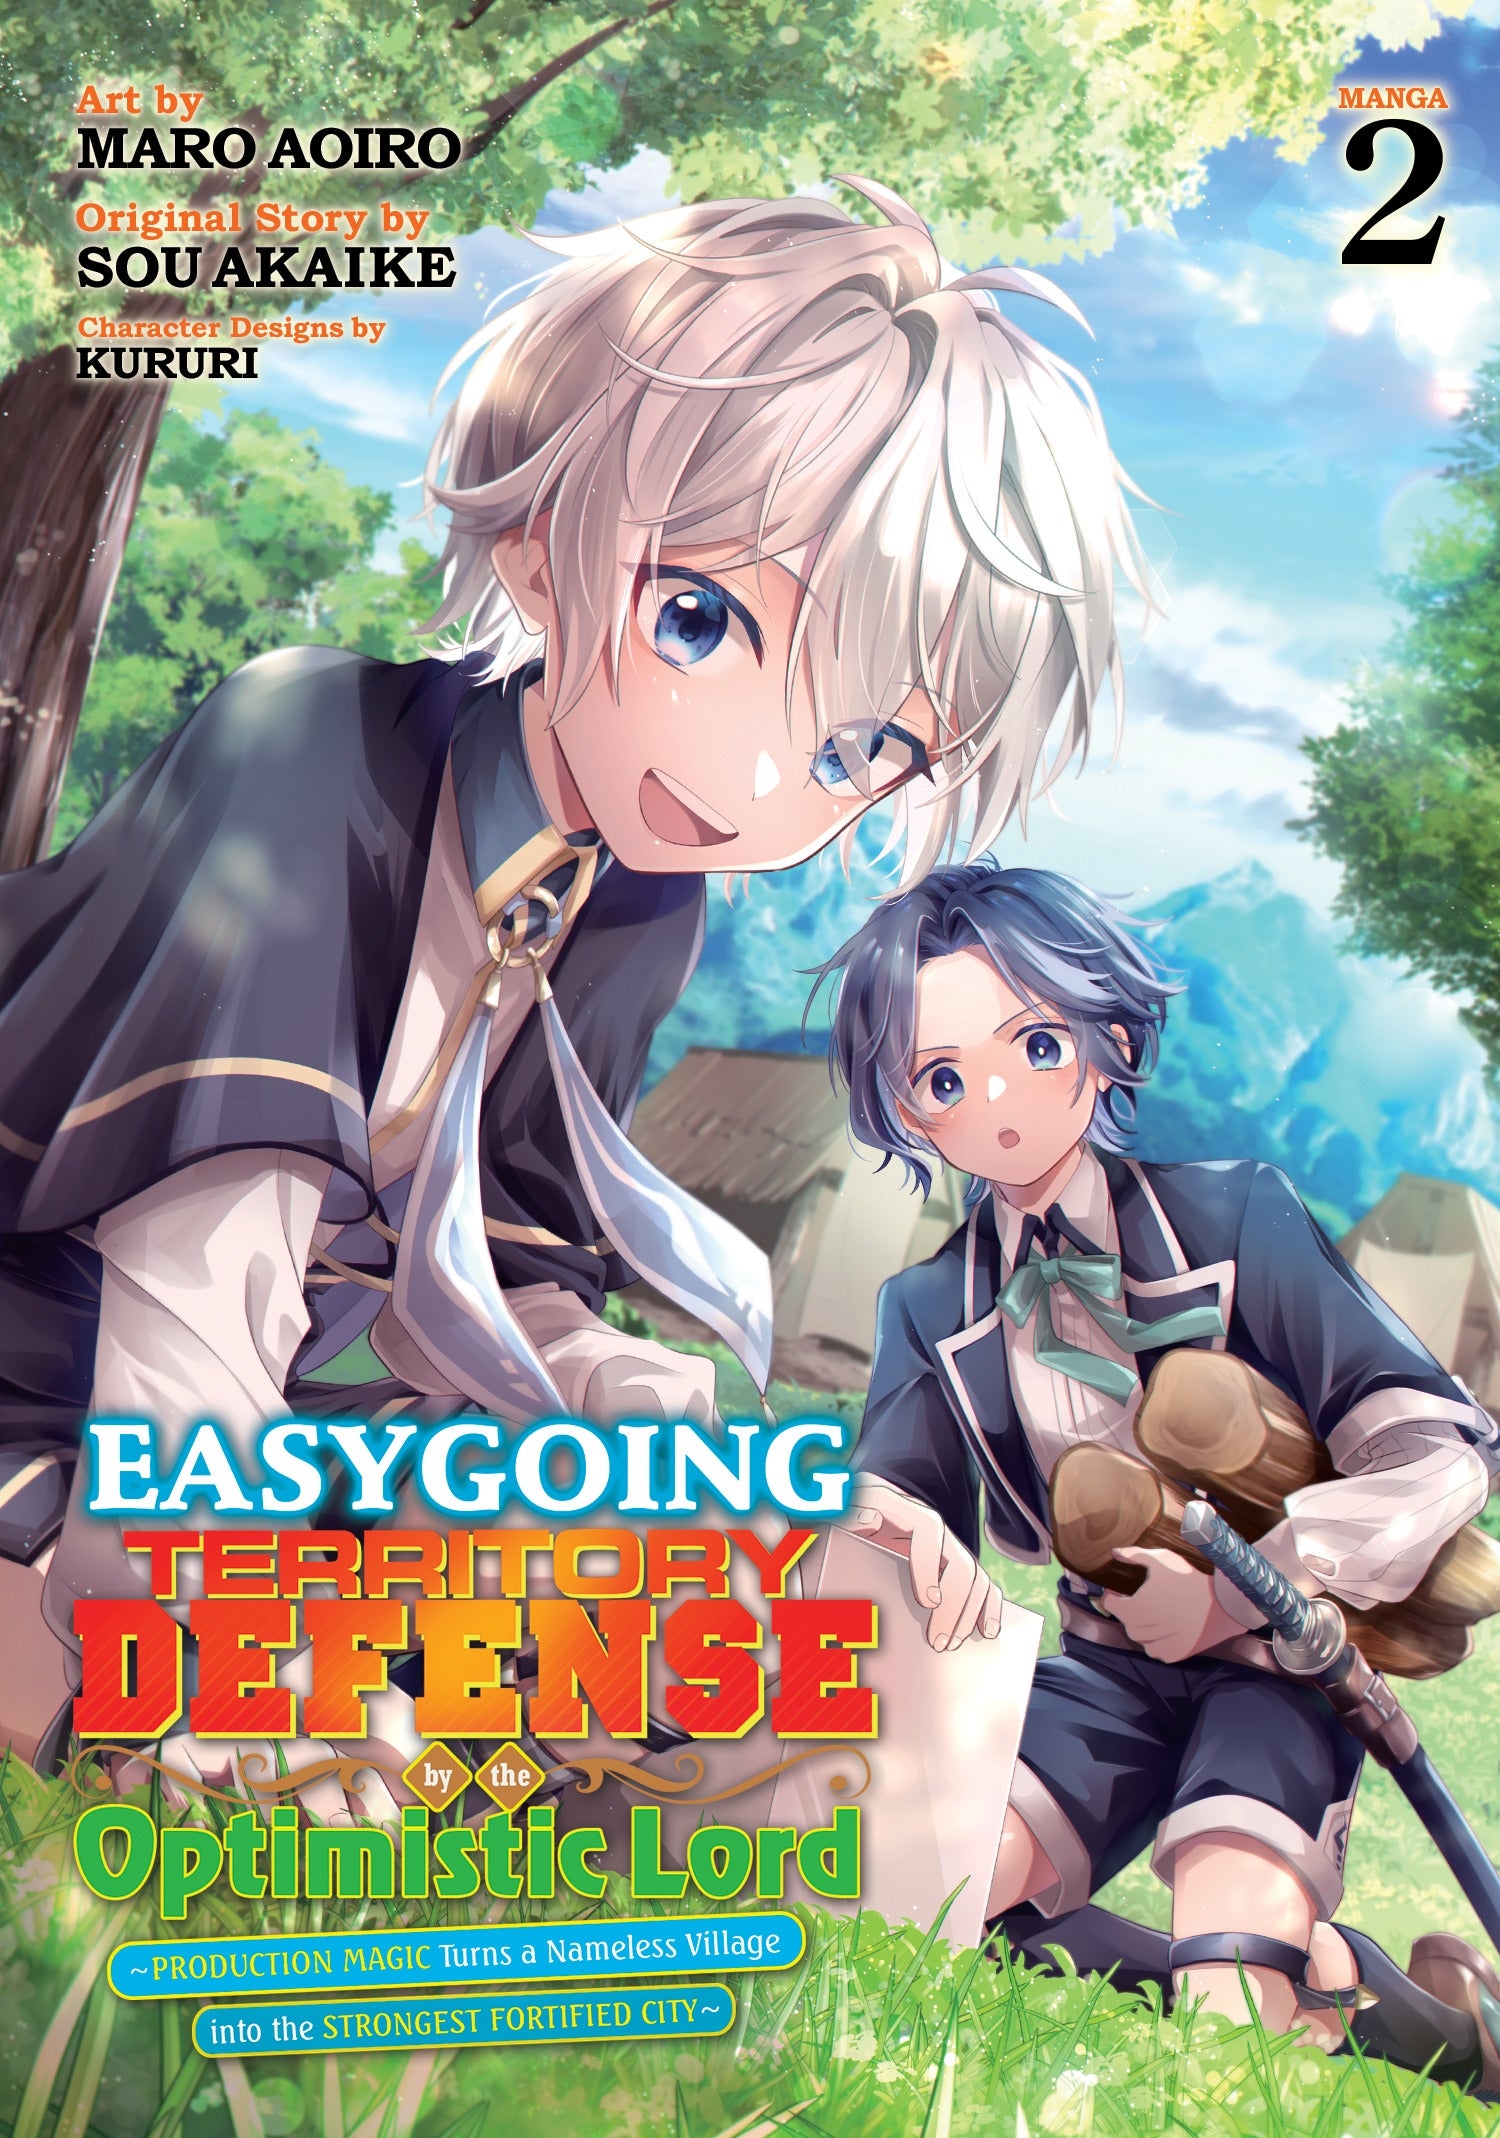 Easygoing Territory Defense by the Optimistic Lord: Production Magic Turns a Nameless Village into the Strongest Fortified City (Manga), Vol. 2 **Pre-Order**